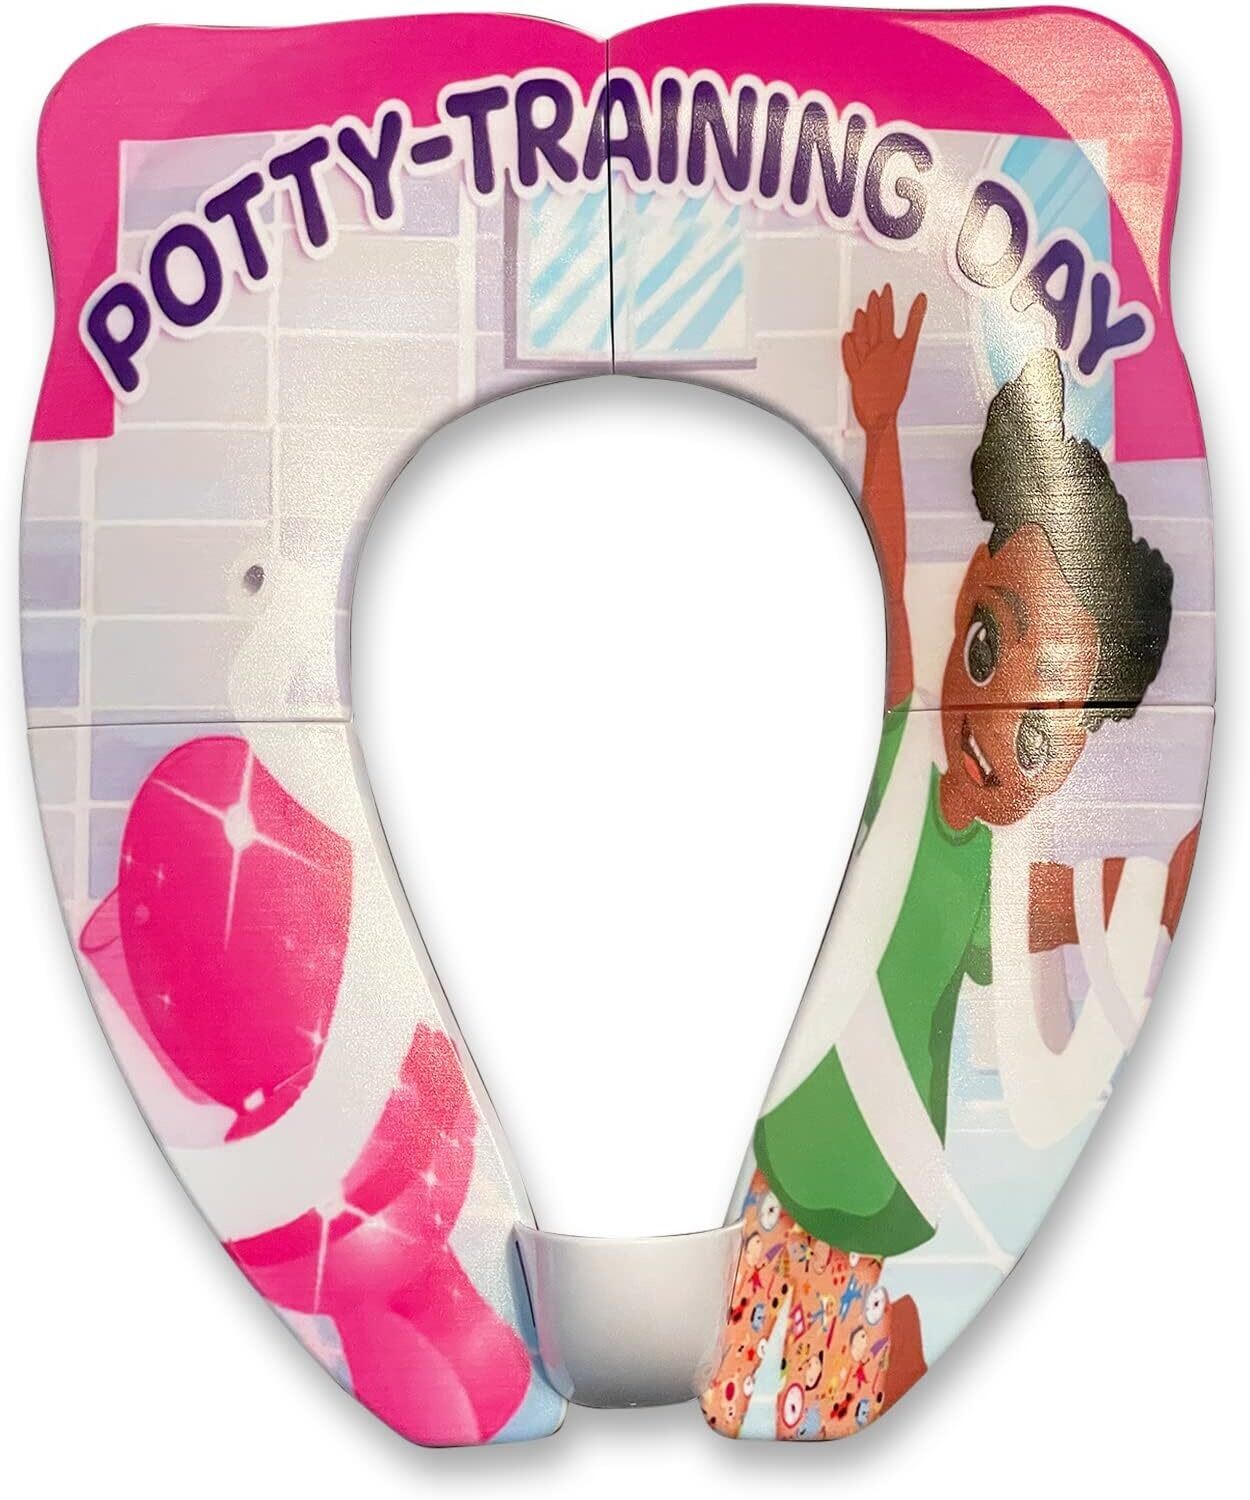 Potty-Training Day" Themed Foldable/Portable/Travel Potty Seat Cover (with Splash Guard and Carry Bag) | Fits Most Toilets for Baby, Toddler, and Child